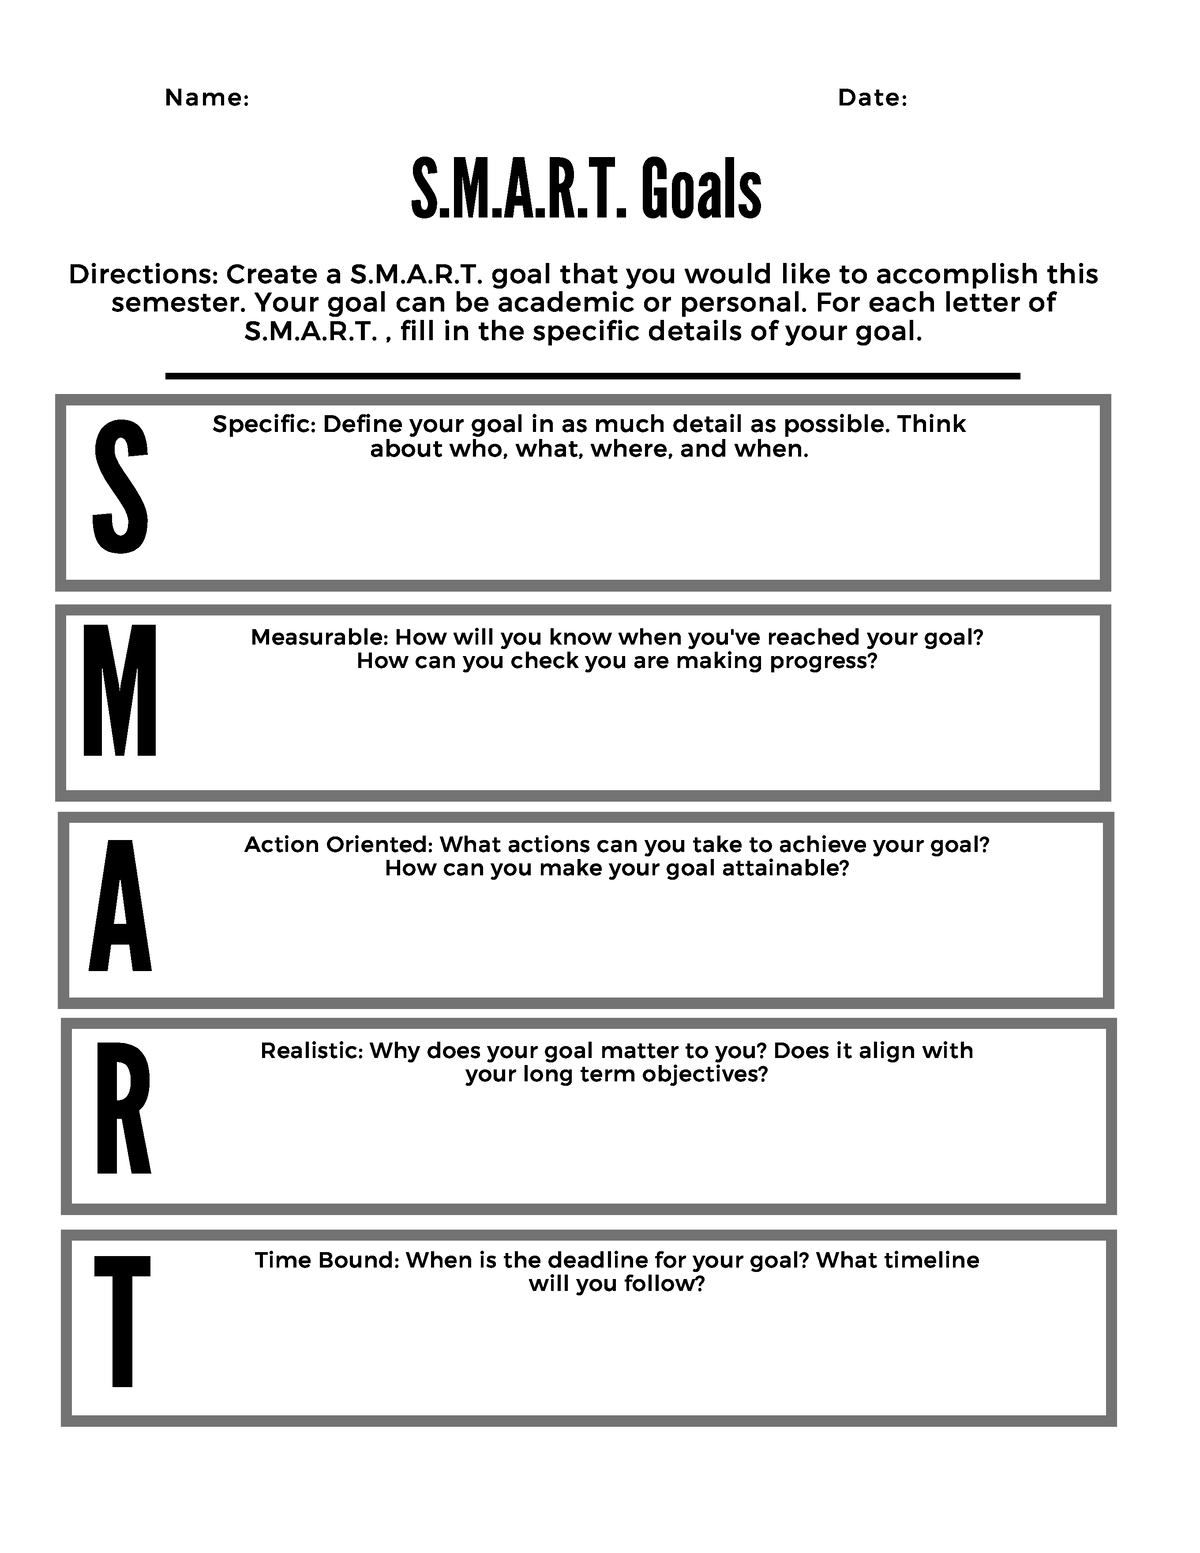 Smart goals worksheet - S.M.A. Goals Name: Date: Directions: Create a S ...